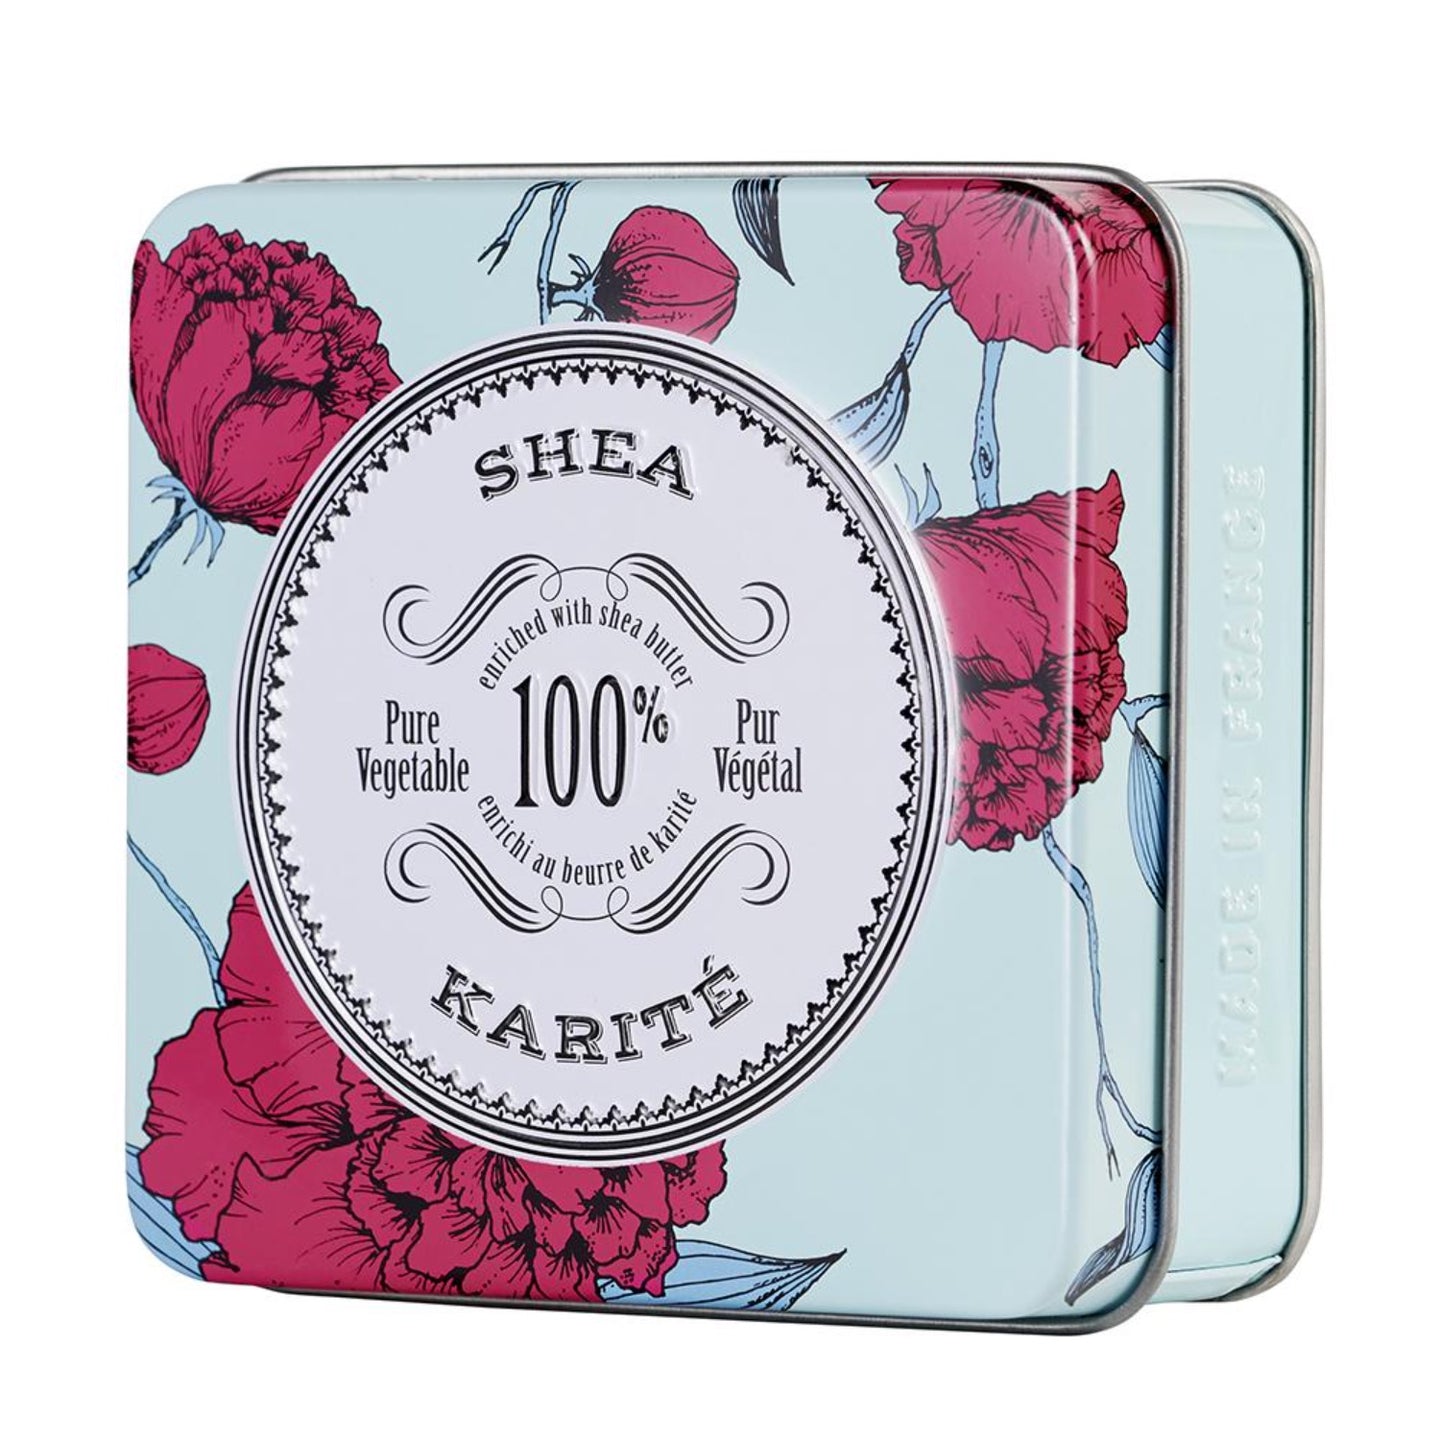 La Chatelaine tinned travel shea butter soap, made in France.